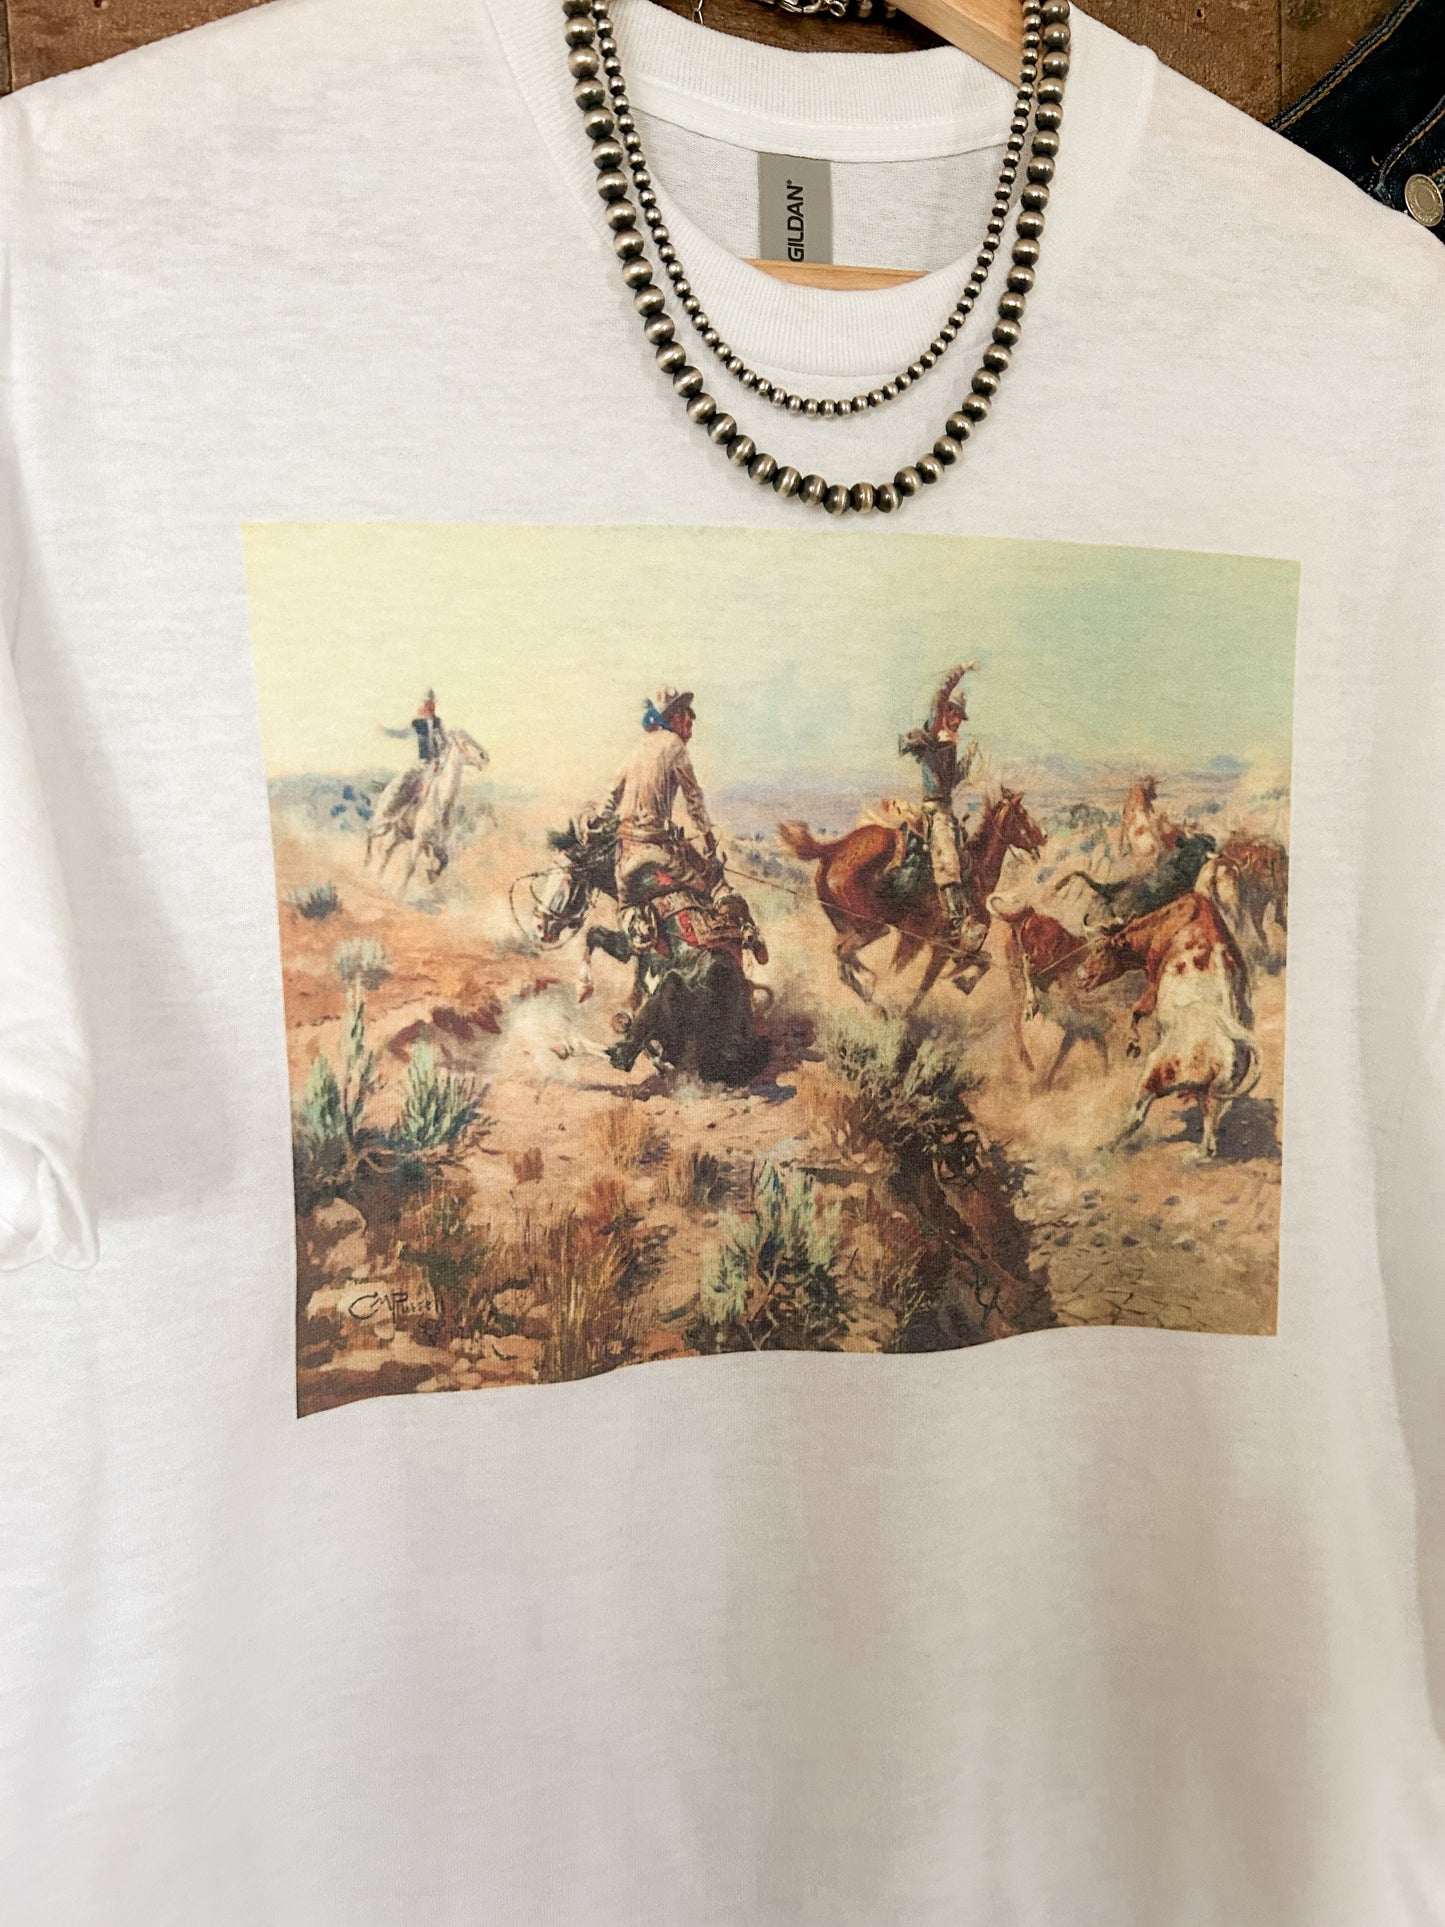 The Time to Lasso Tee